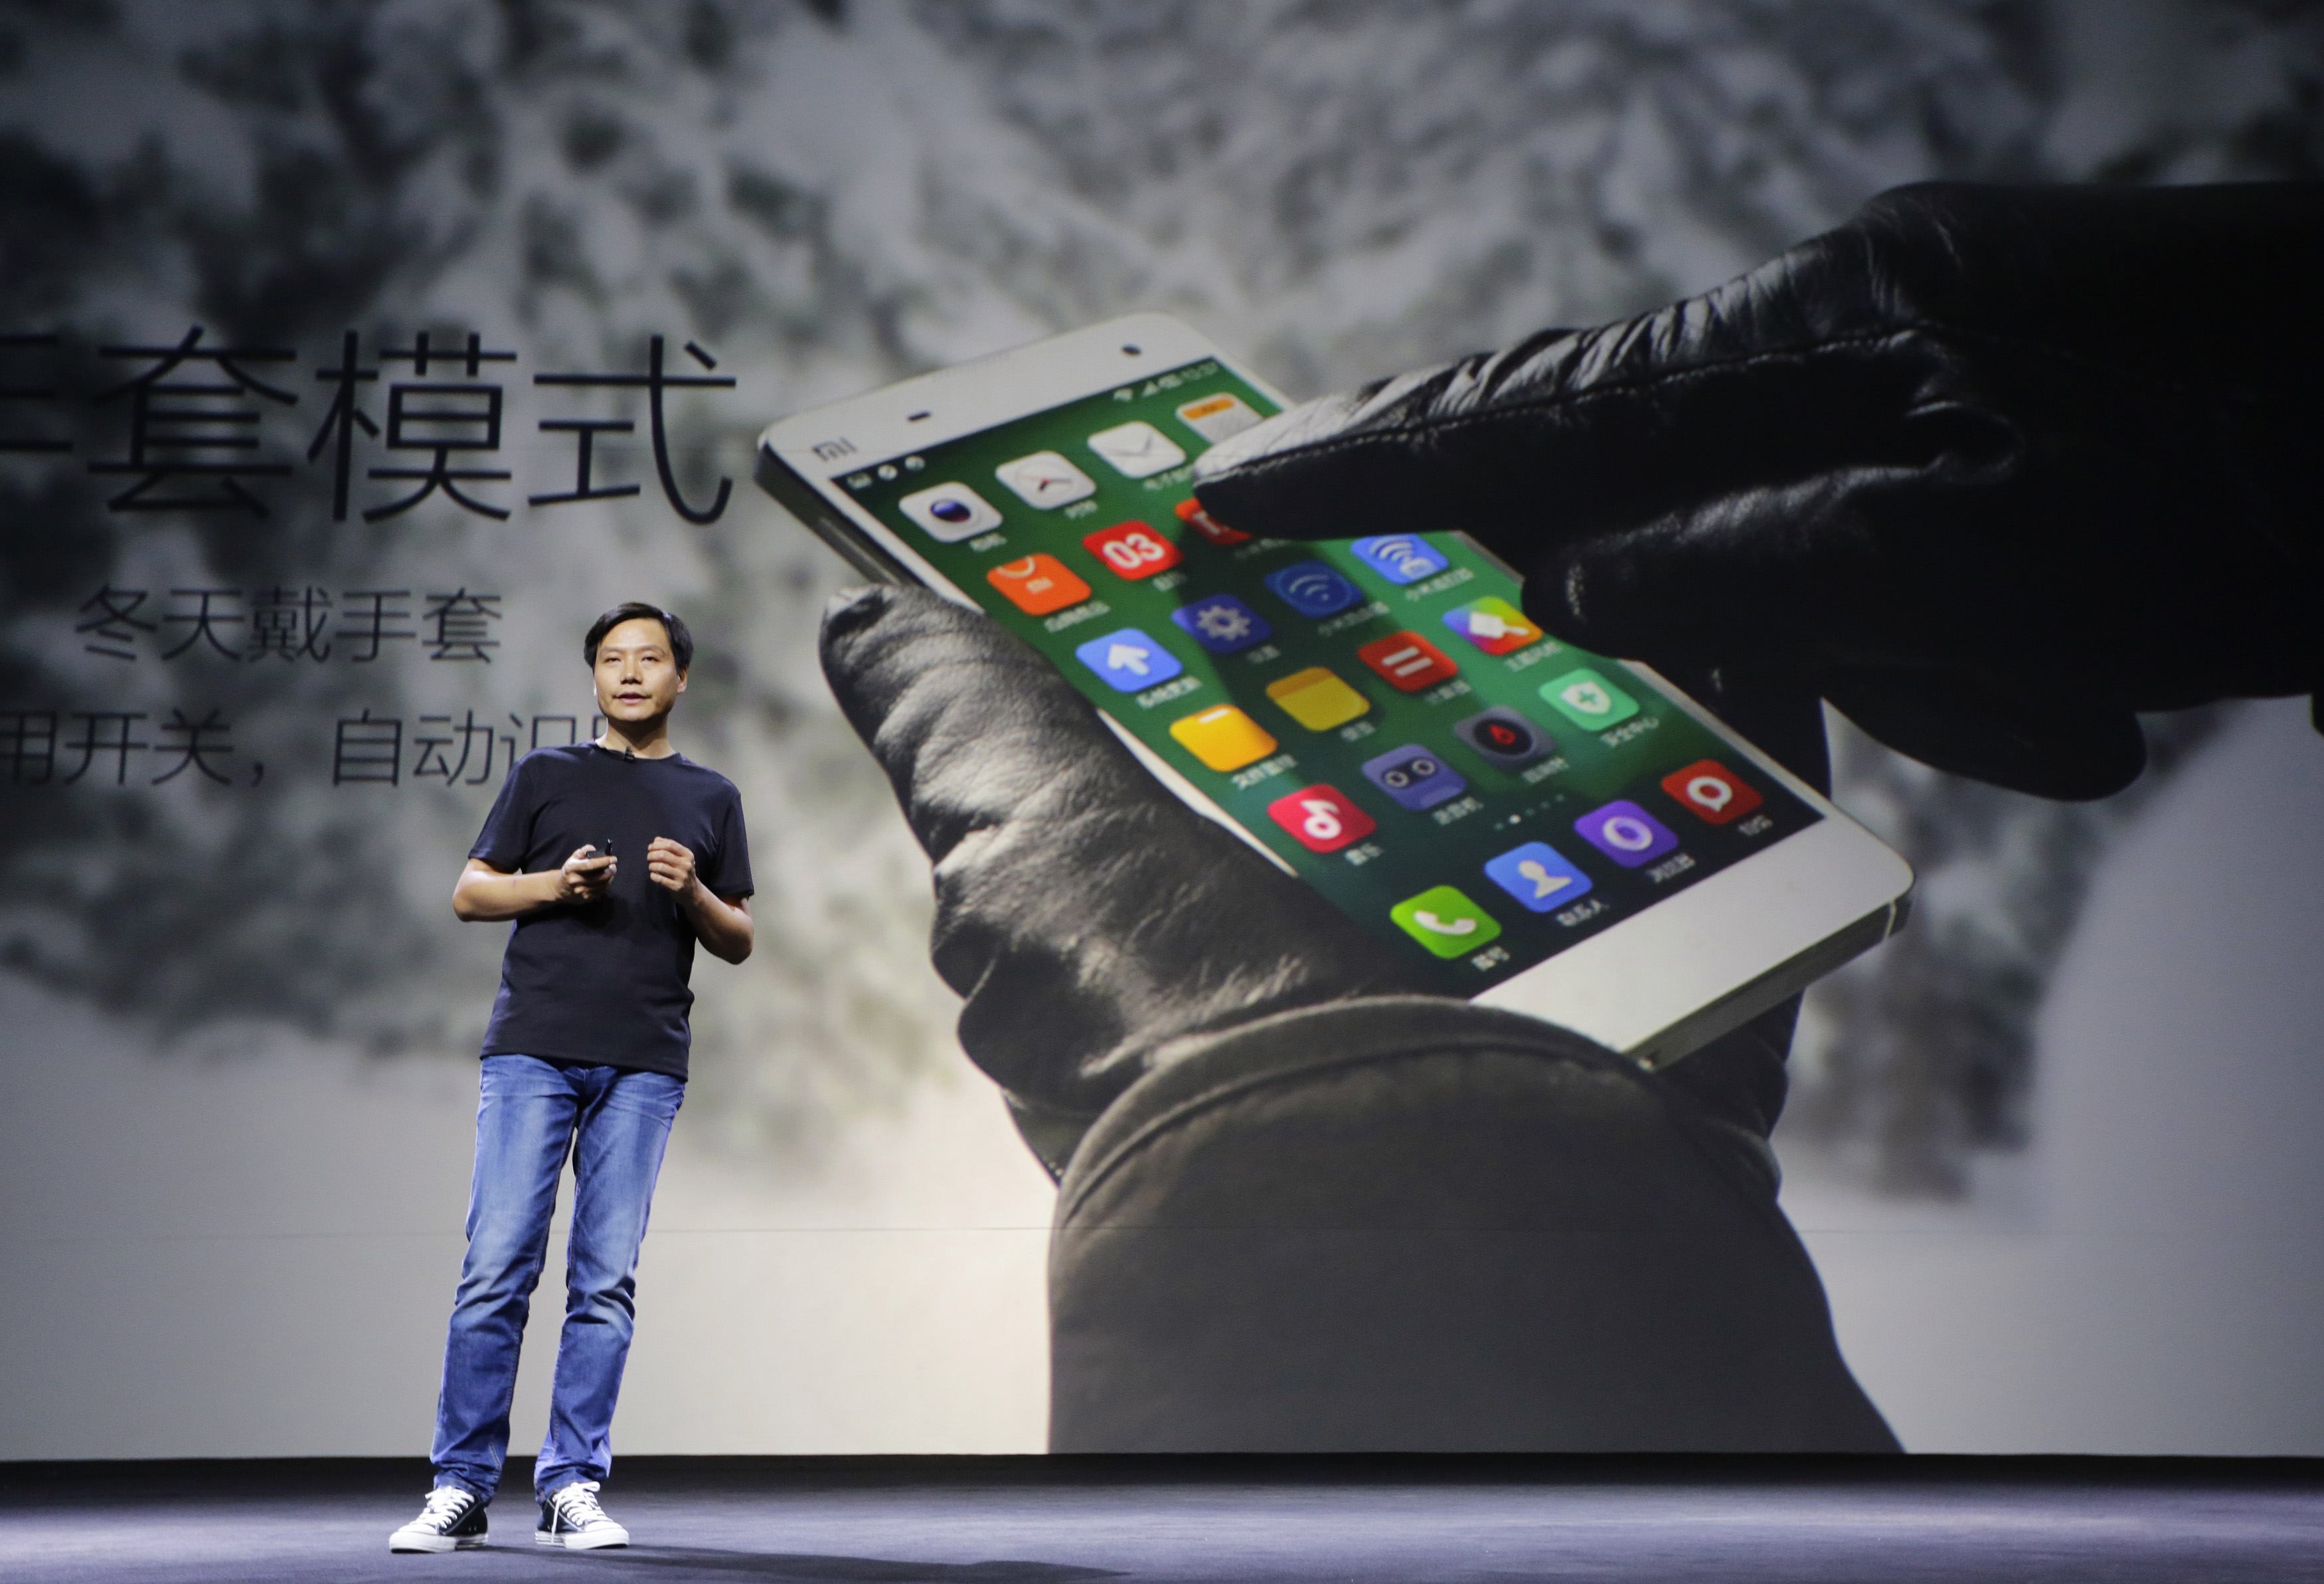 Lei Jun, CEO mobile company Xiaomi, introduces Xiaomi Phone 4 at a launching ceremony in Beijing. Photo: Reuters